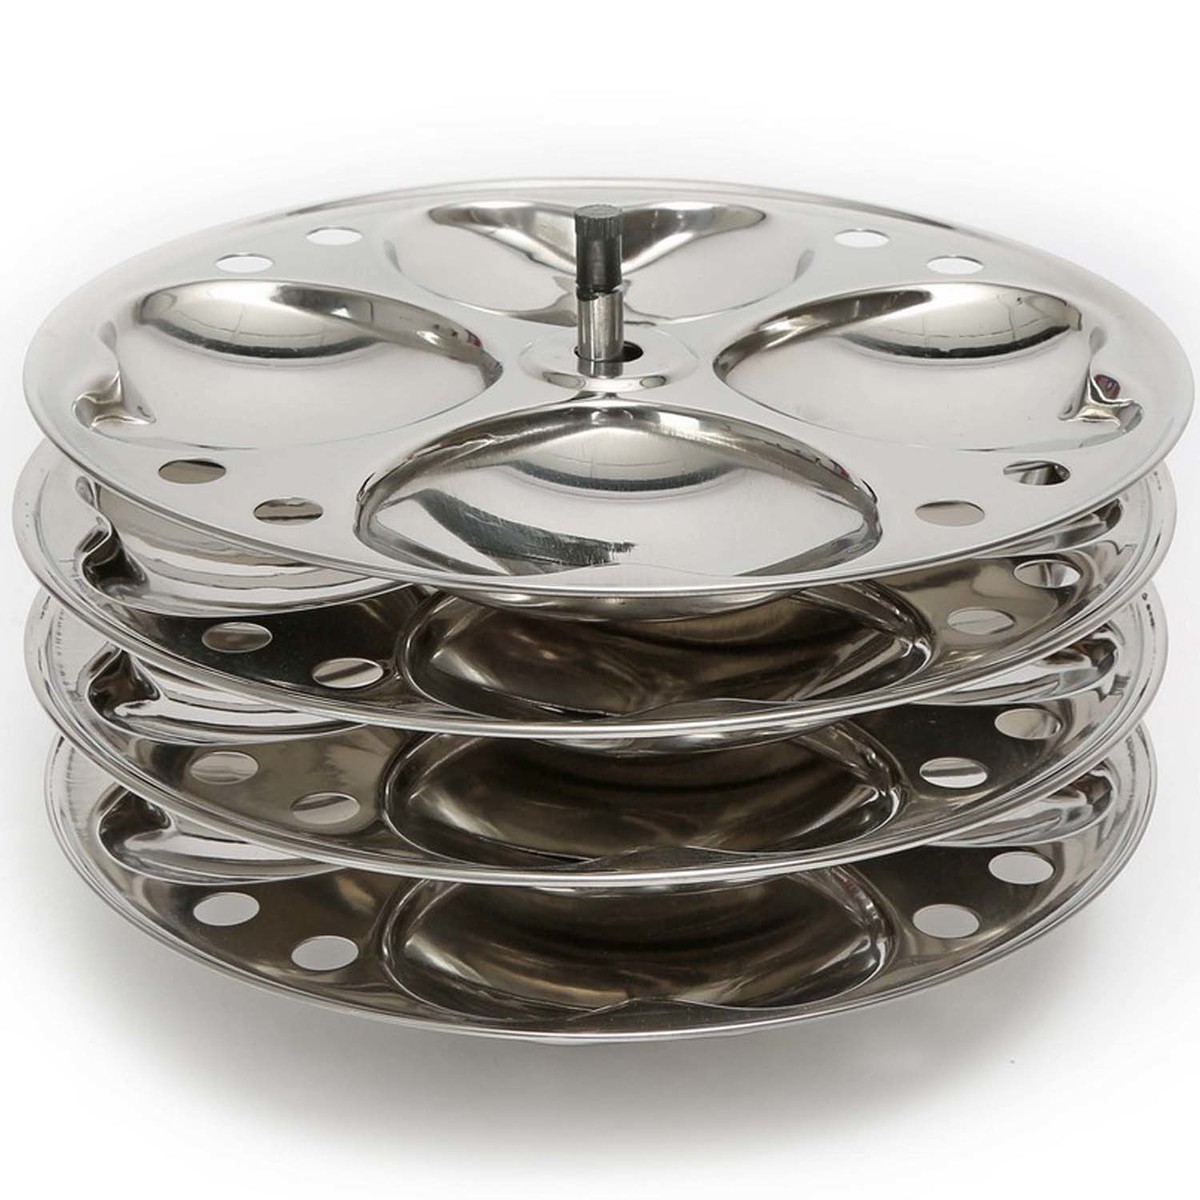 Chefline Stainless Steel Idly Stand Assorted